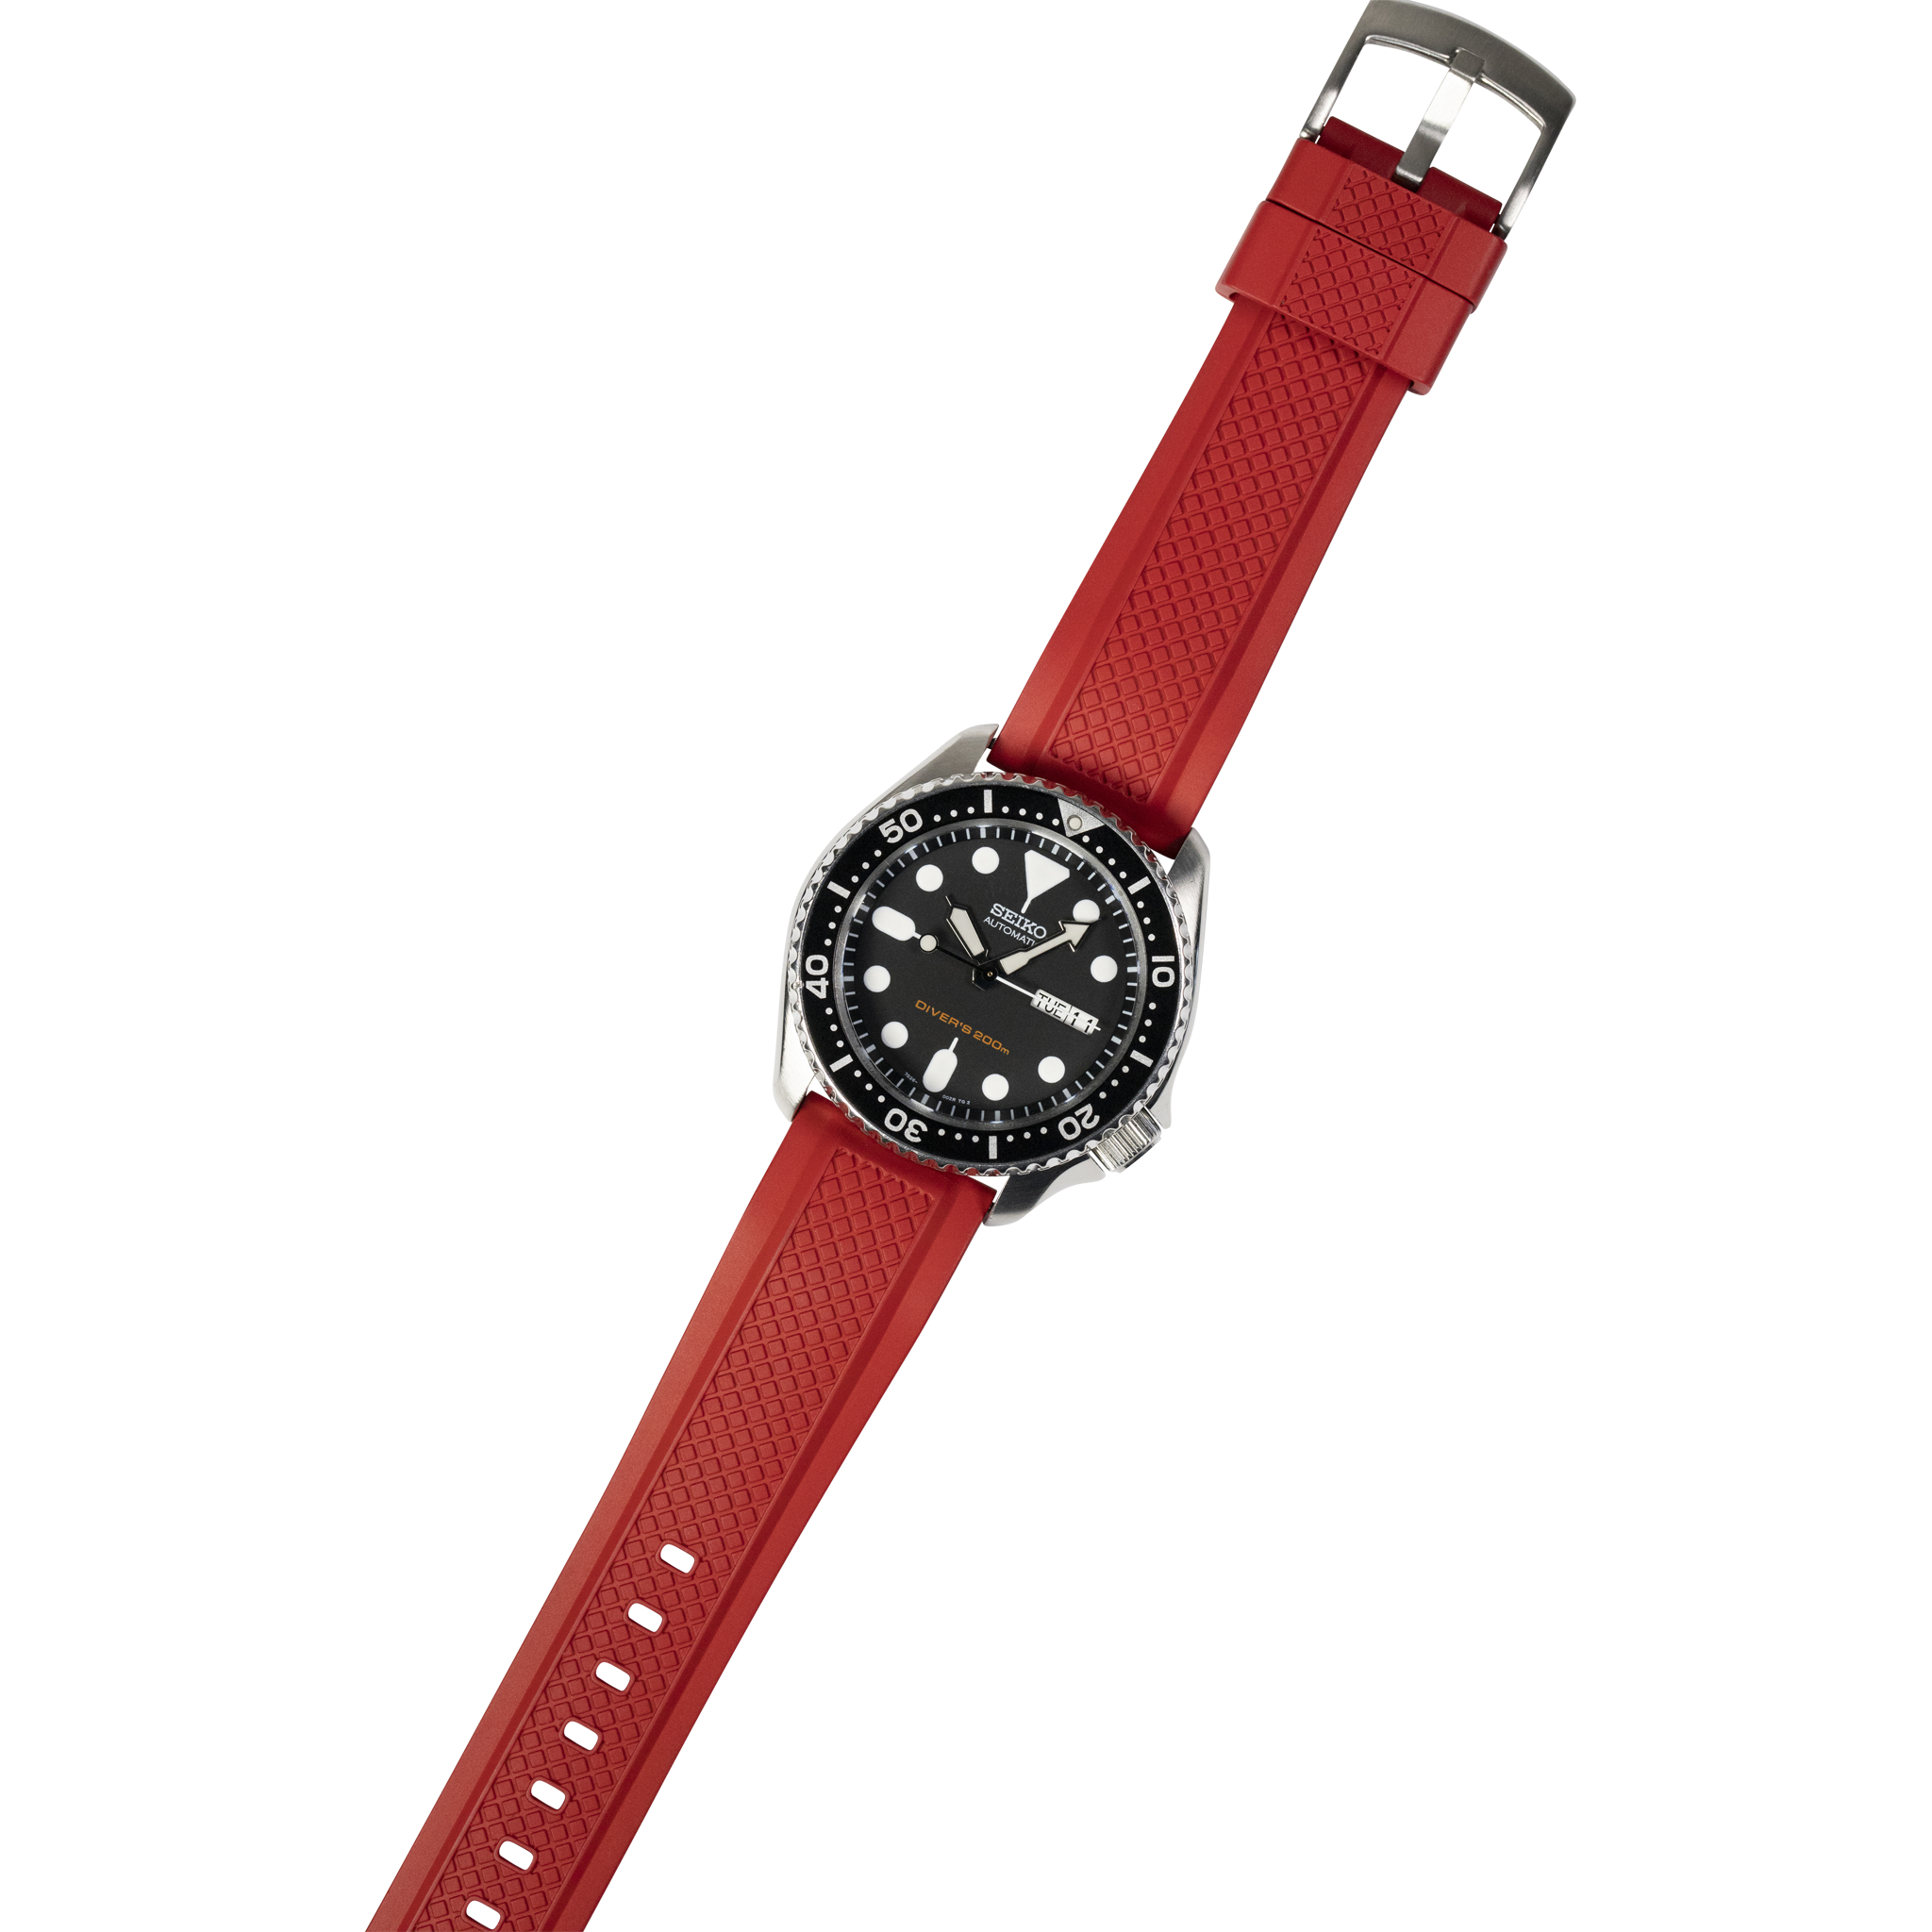 [Quick Release] GridLock FKM Rubber - Red